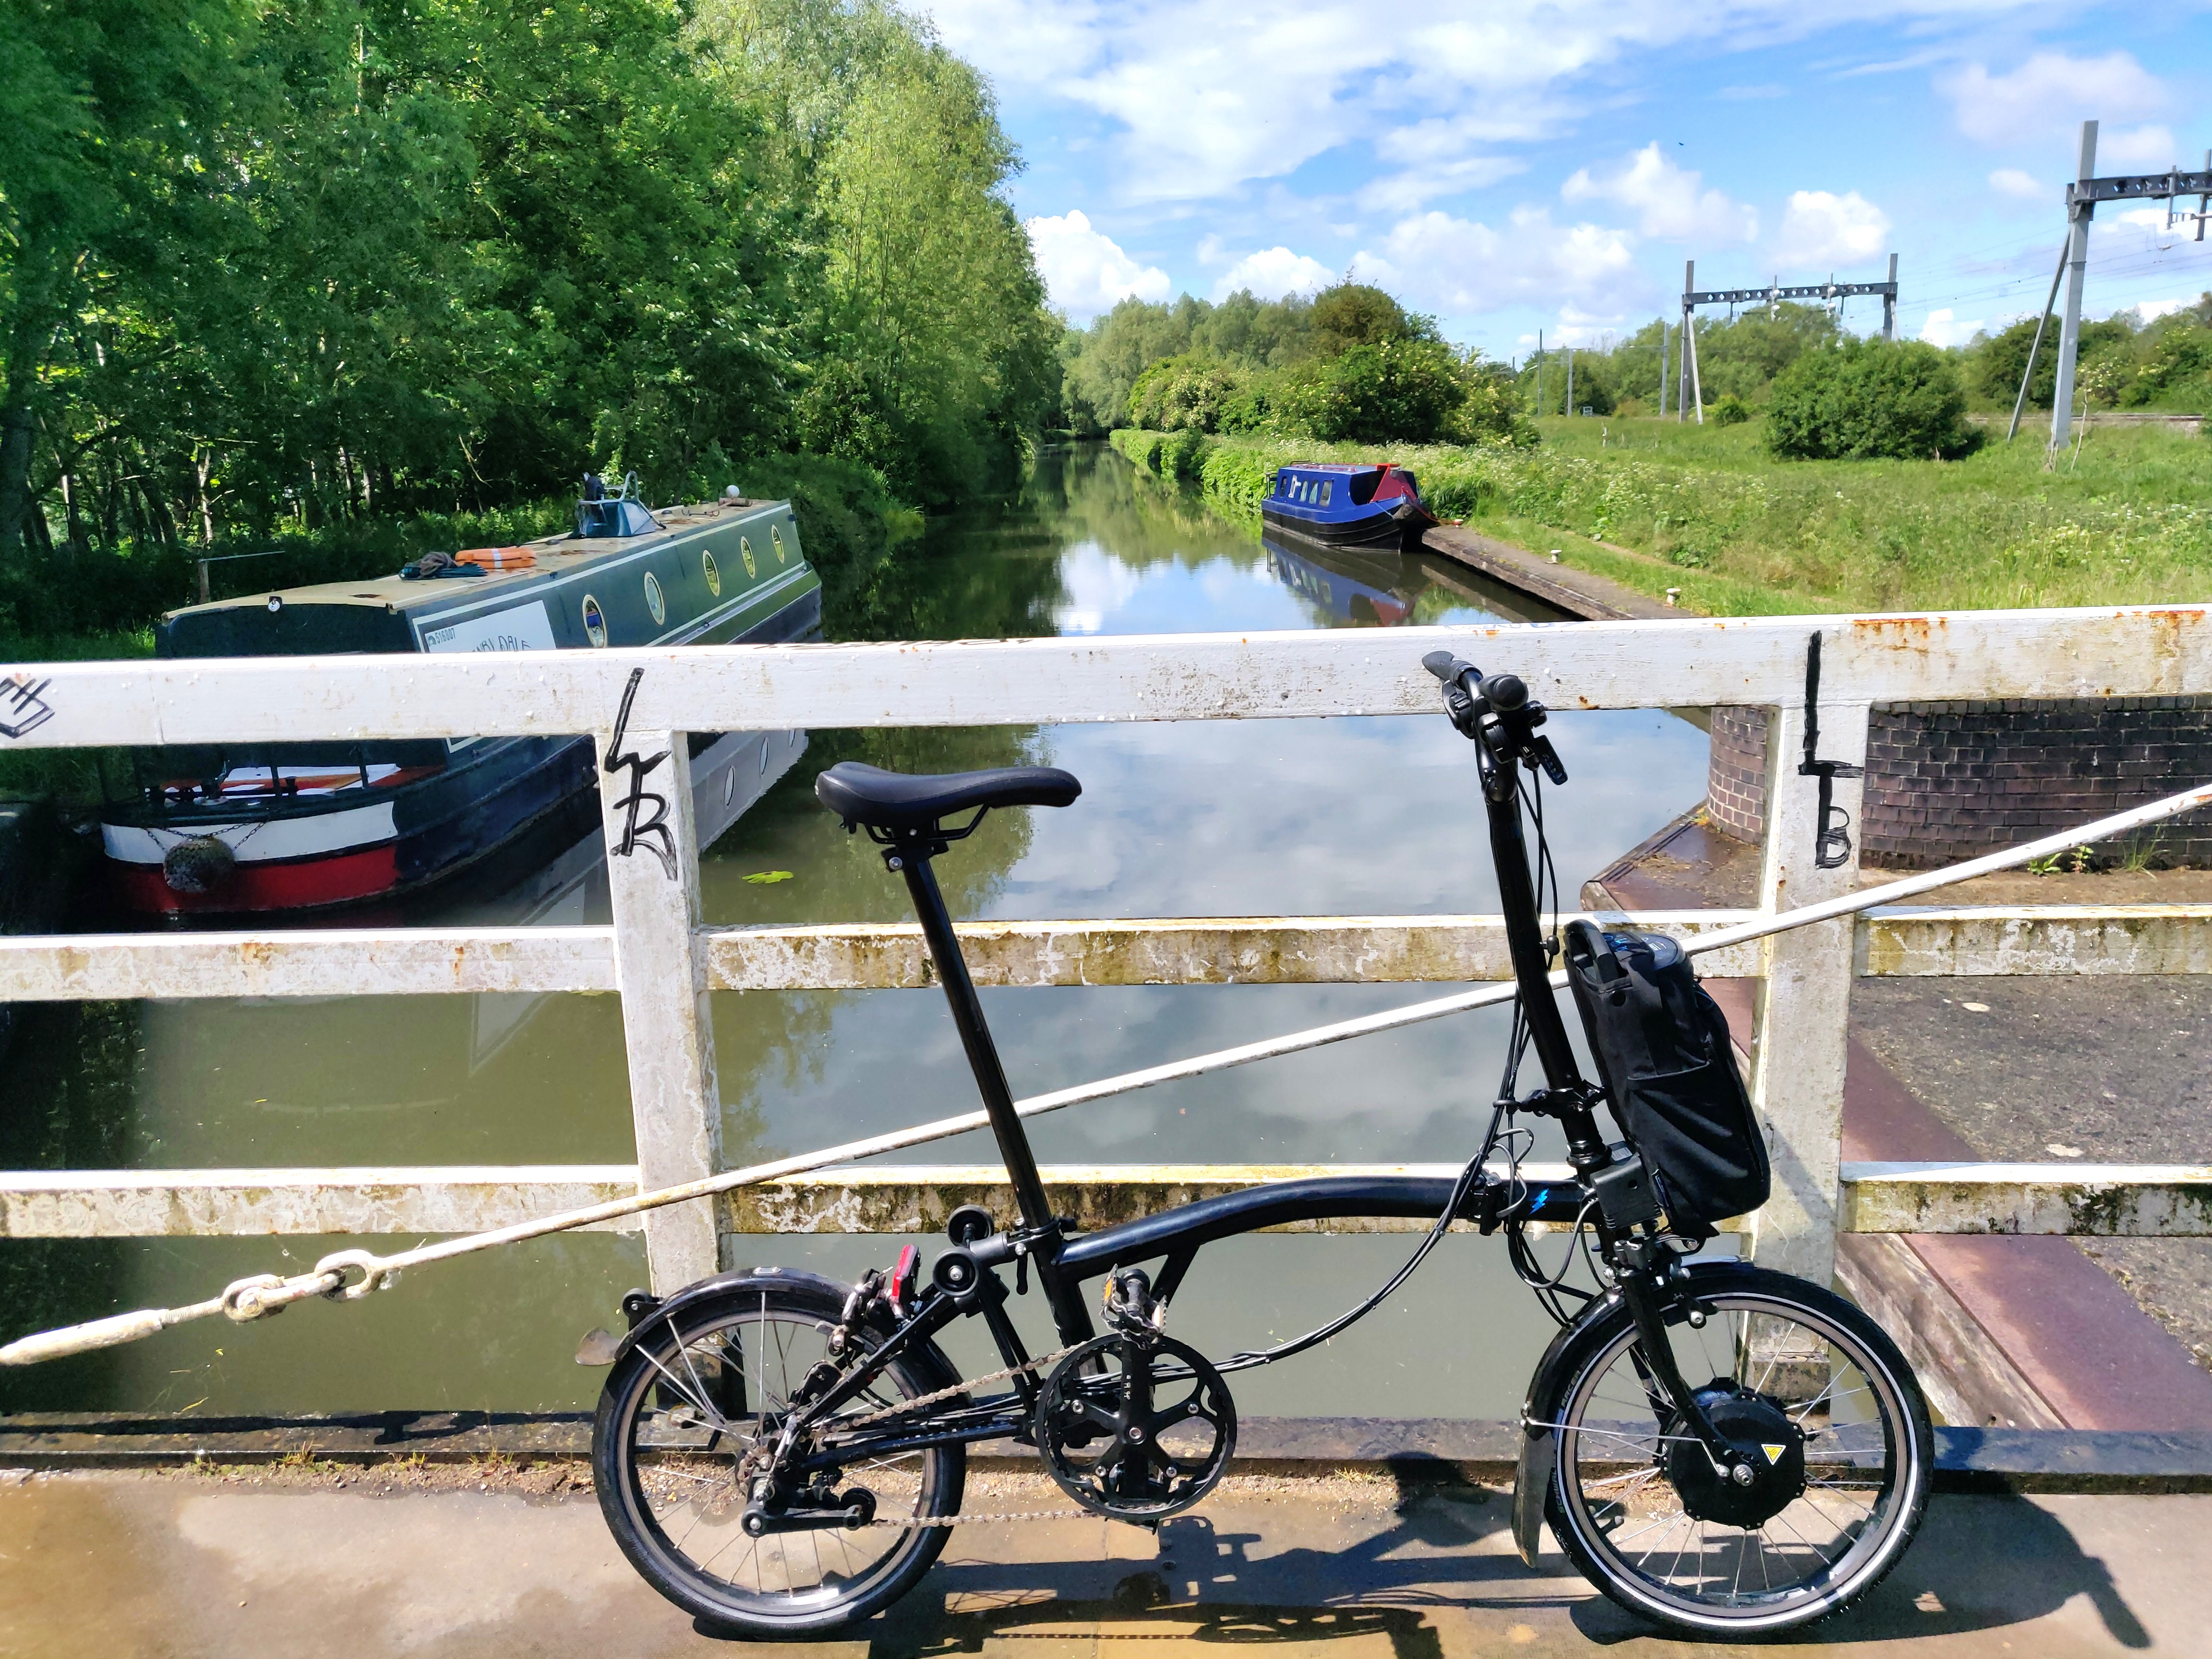 Photo of a black Brompton folding bike on a bridge over a canal. There is a green narrowboat moored to the left, and, in the distance, a blue narrowboat moored to the right. There is plenty of greenery on both sides of the canal. The water is a murky grey/green